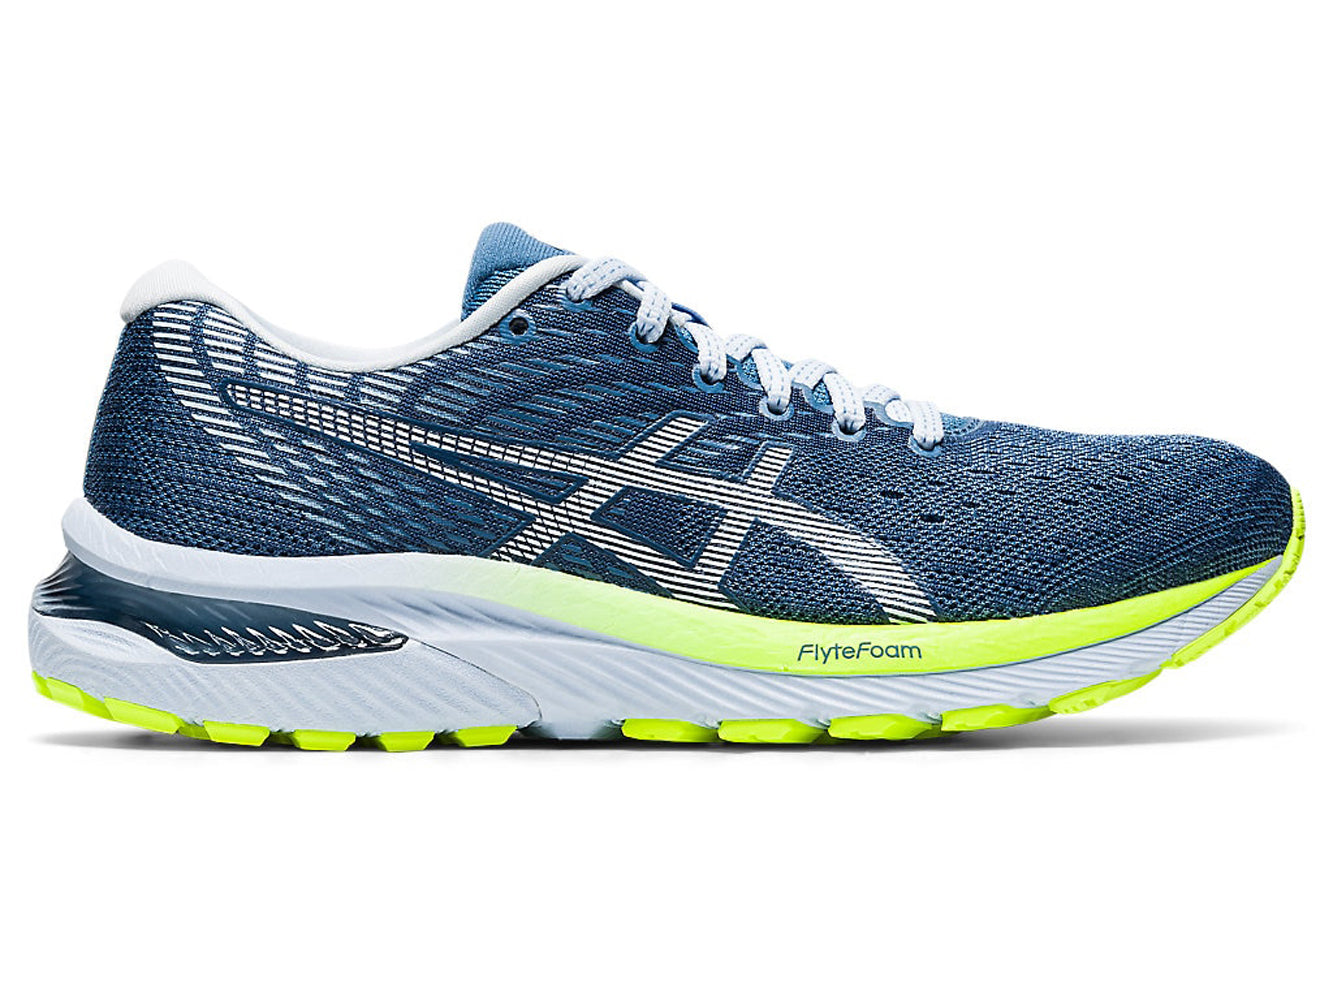 Women's Asics GEL-Cumulus 22 Running Shoe in Grey Floss/White from the side